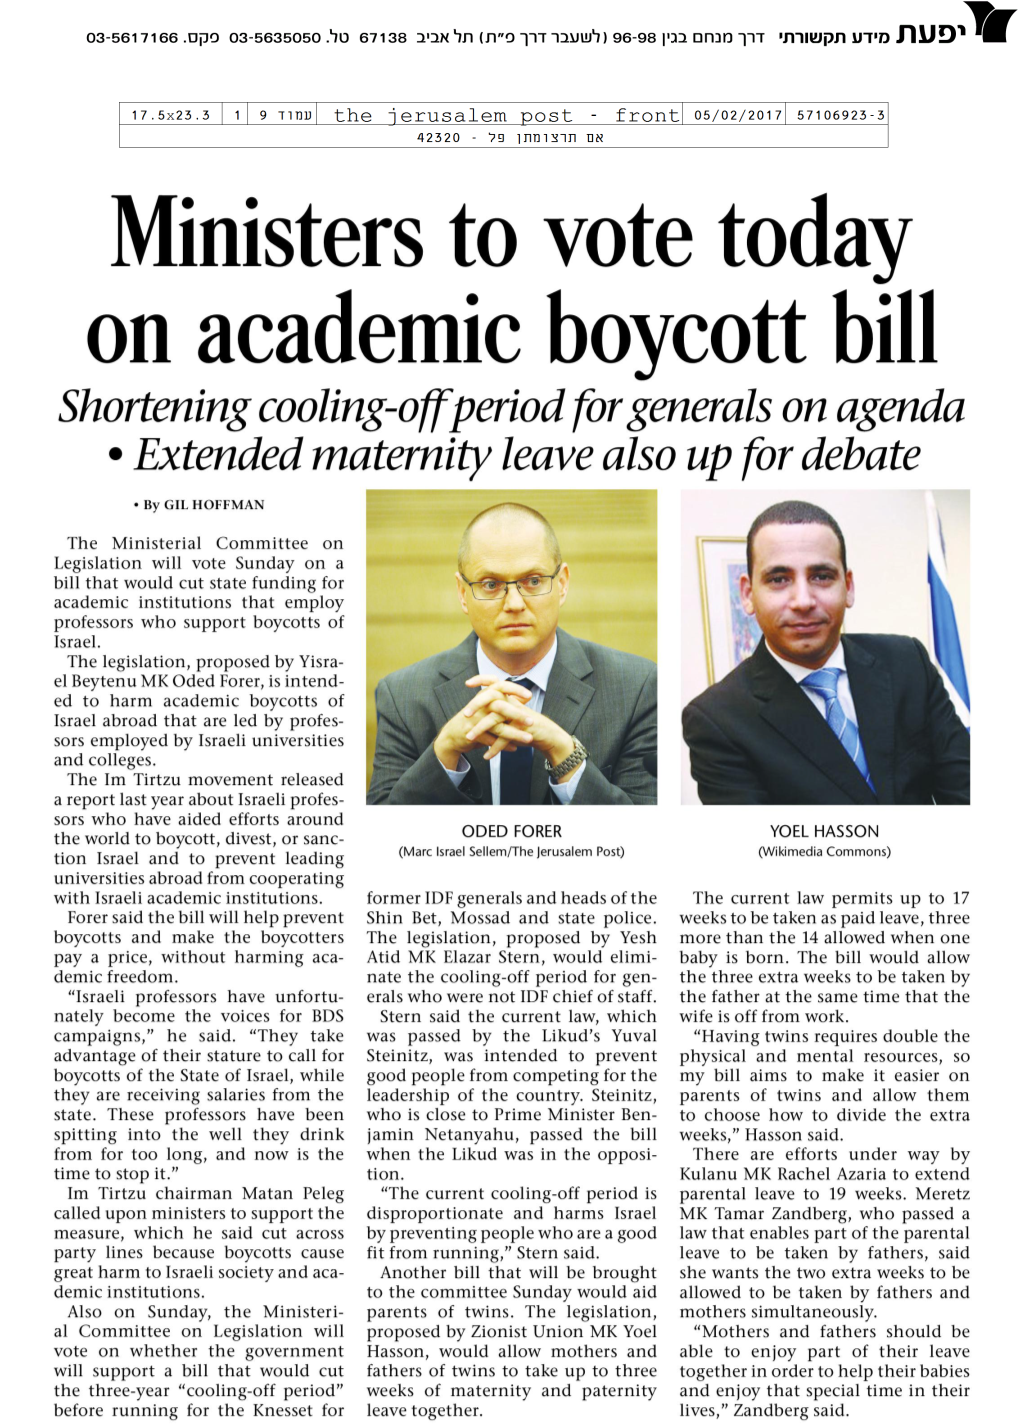 Ministers to Vote Today on Academic Boycott Bill Shortening Cooling-Off Period for Generals on Agenda •Extended Maternity Leave Also up for Debate